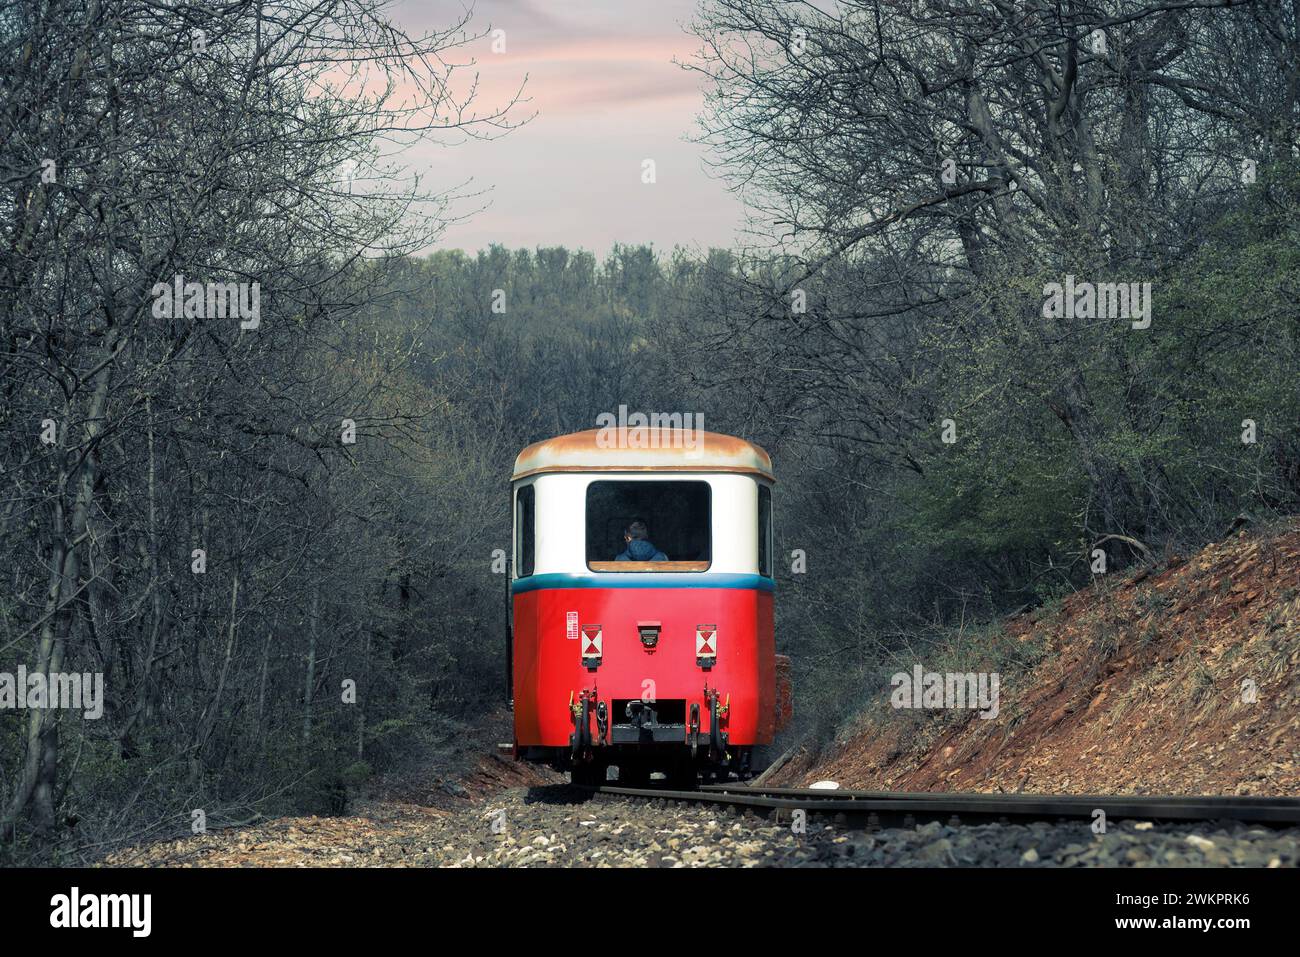 Old train coach rear view, railway in a forest Stock Photo